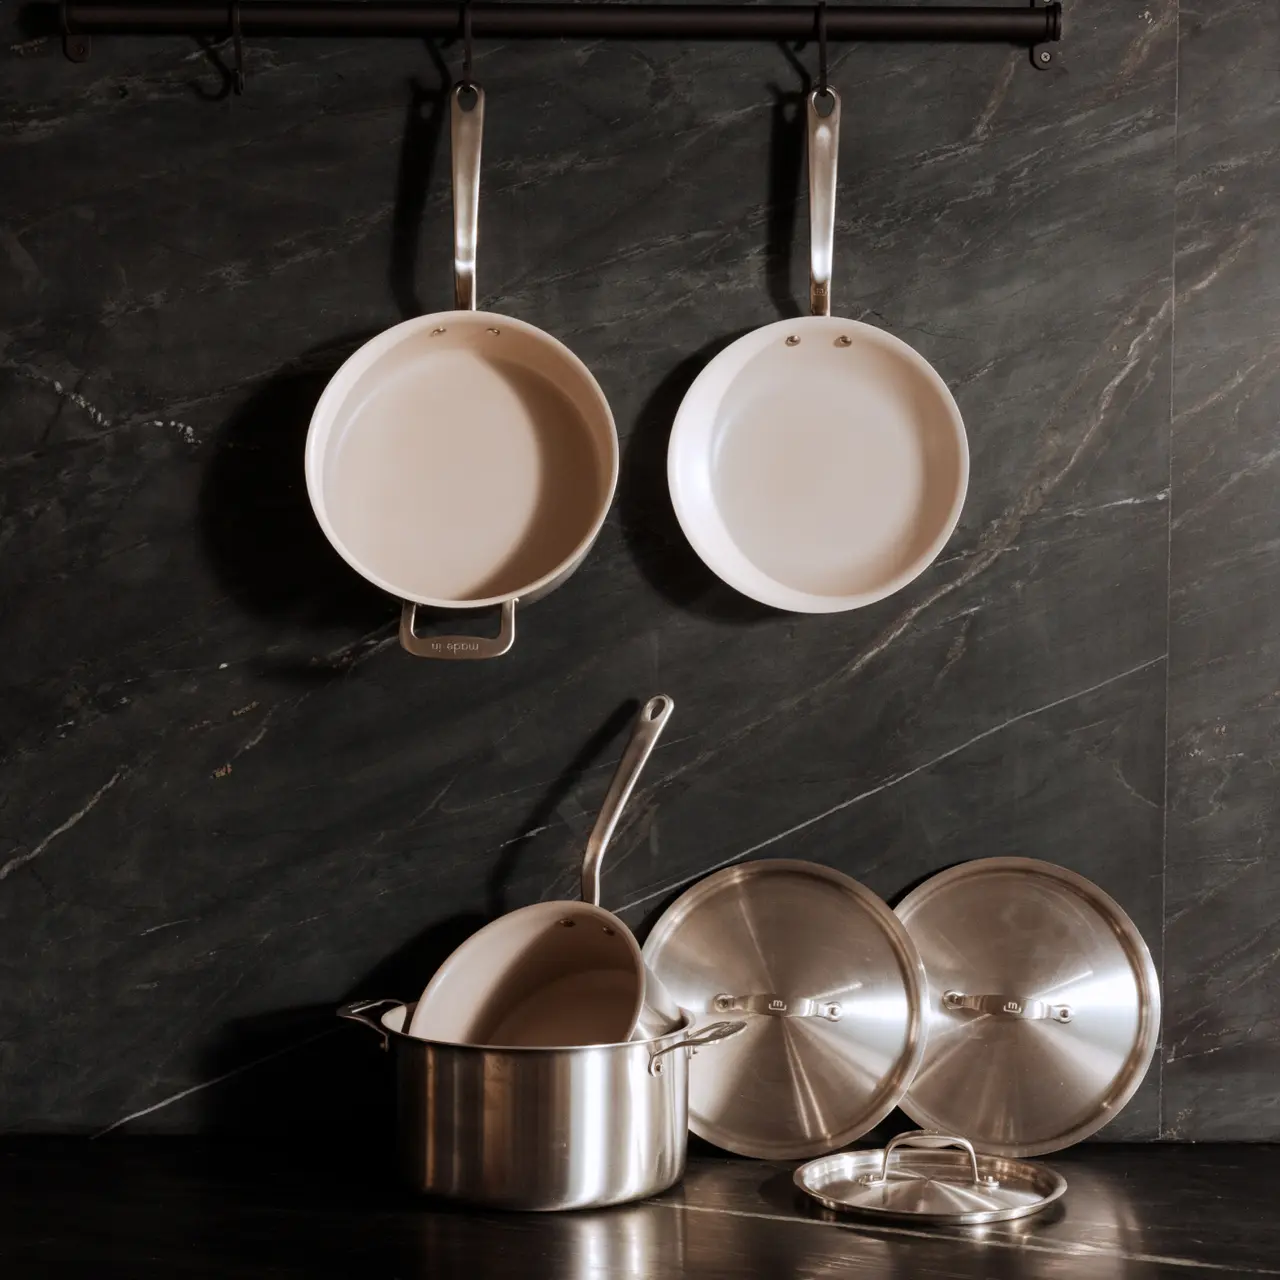 A collection of clean cooking pots and pans neatly arranged, with two hanging against a dark tiled wall and three stacked on a countertop.